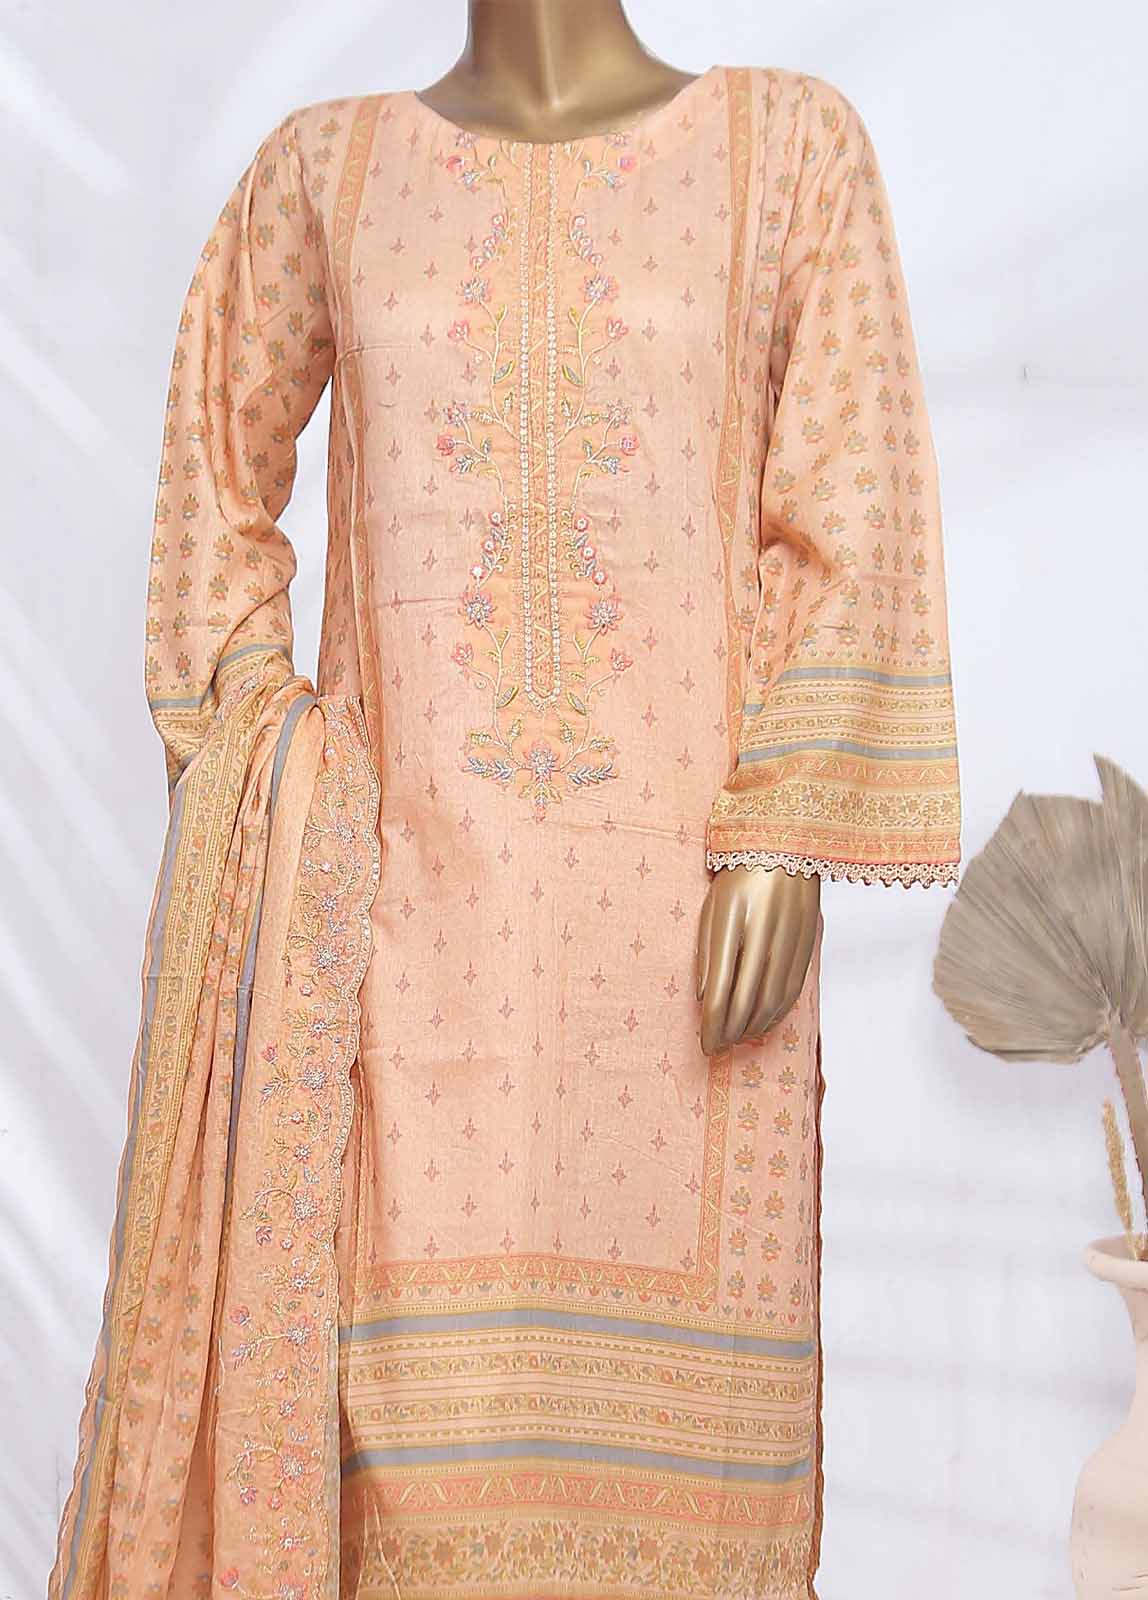 SMLF-ED127- 3 Piece Embroidered Stitched Suit